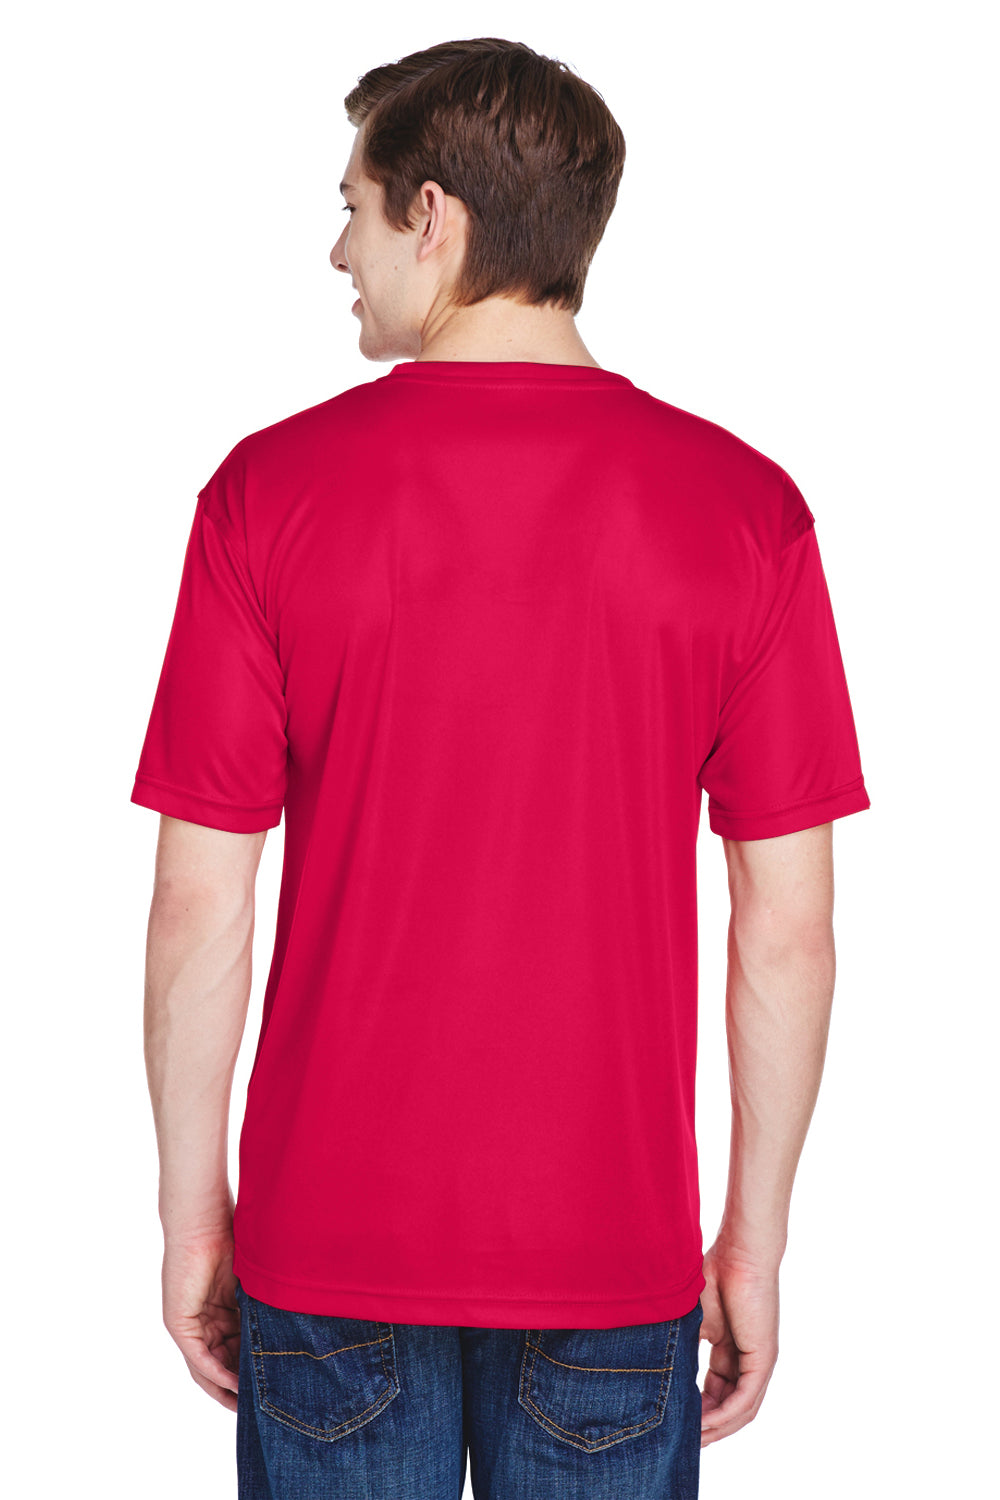 UltraClub 8620 Mens Cool & Dry Performance Moisture Wicking Short Sleeve Crewneck T-Shirt Red Back